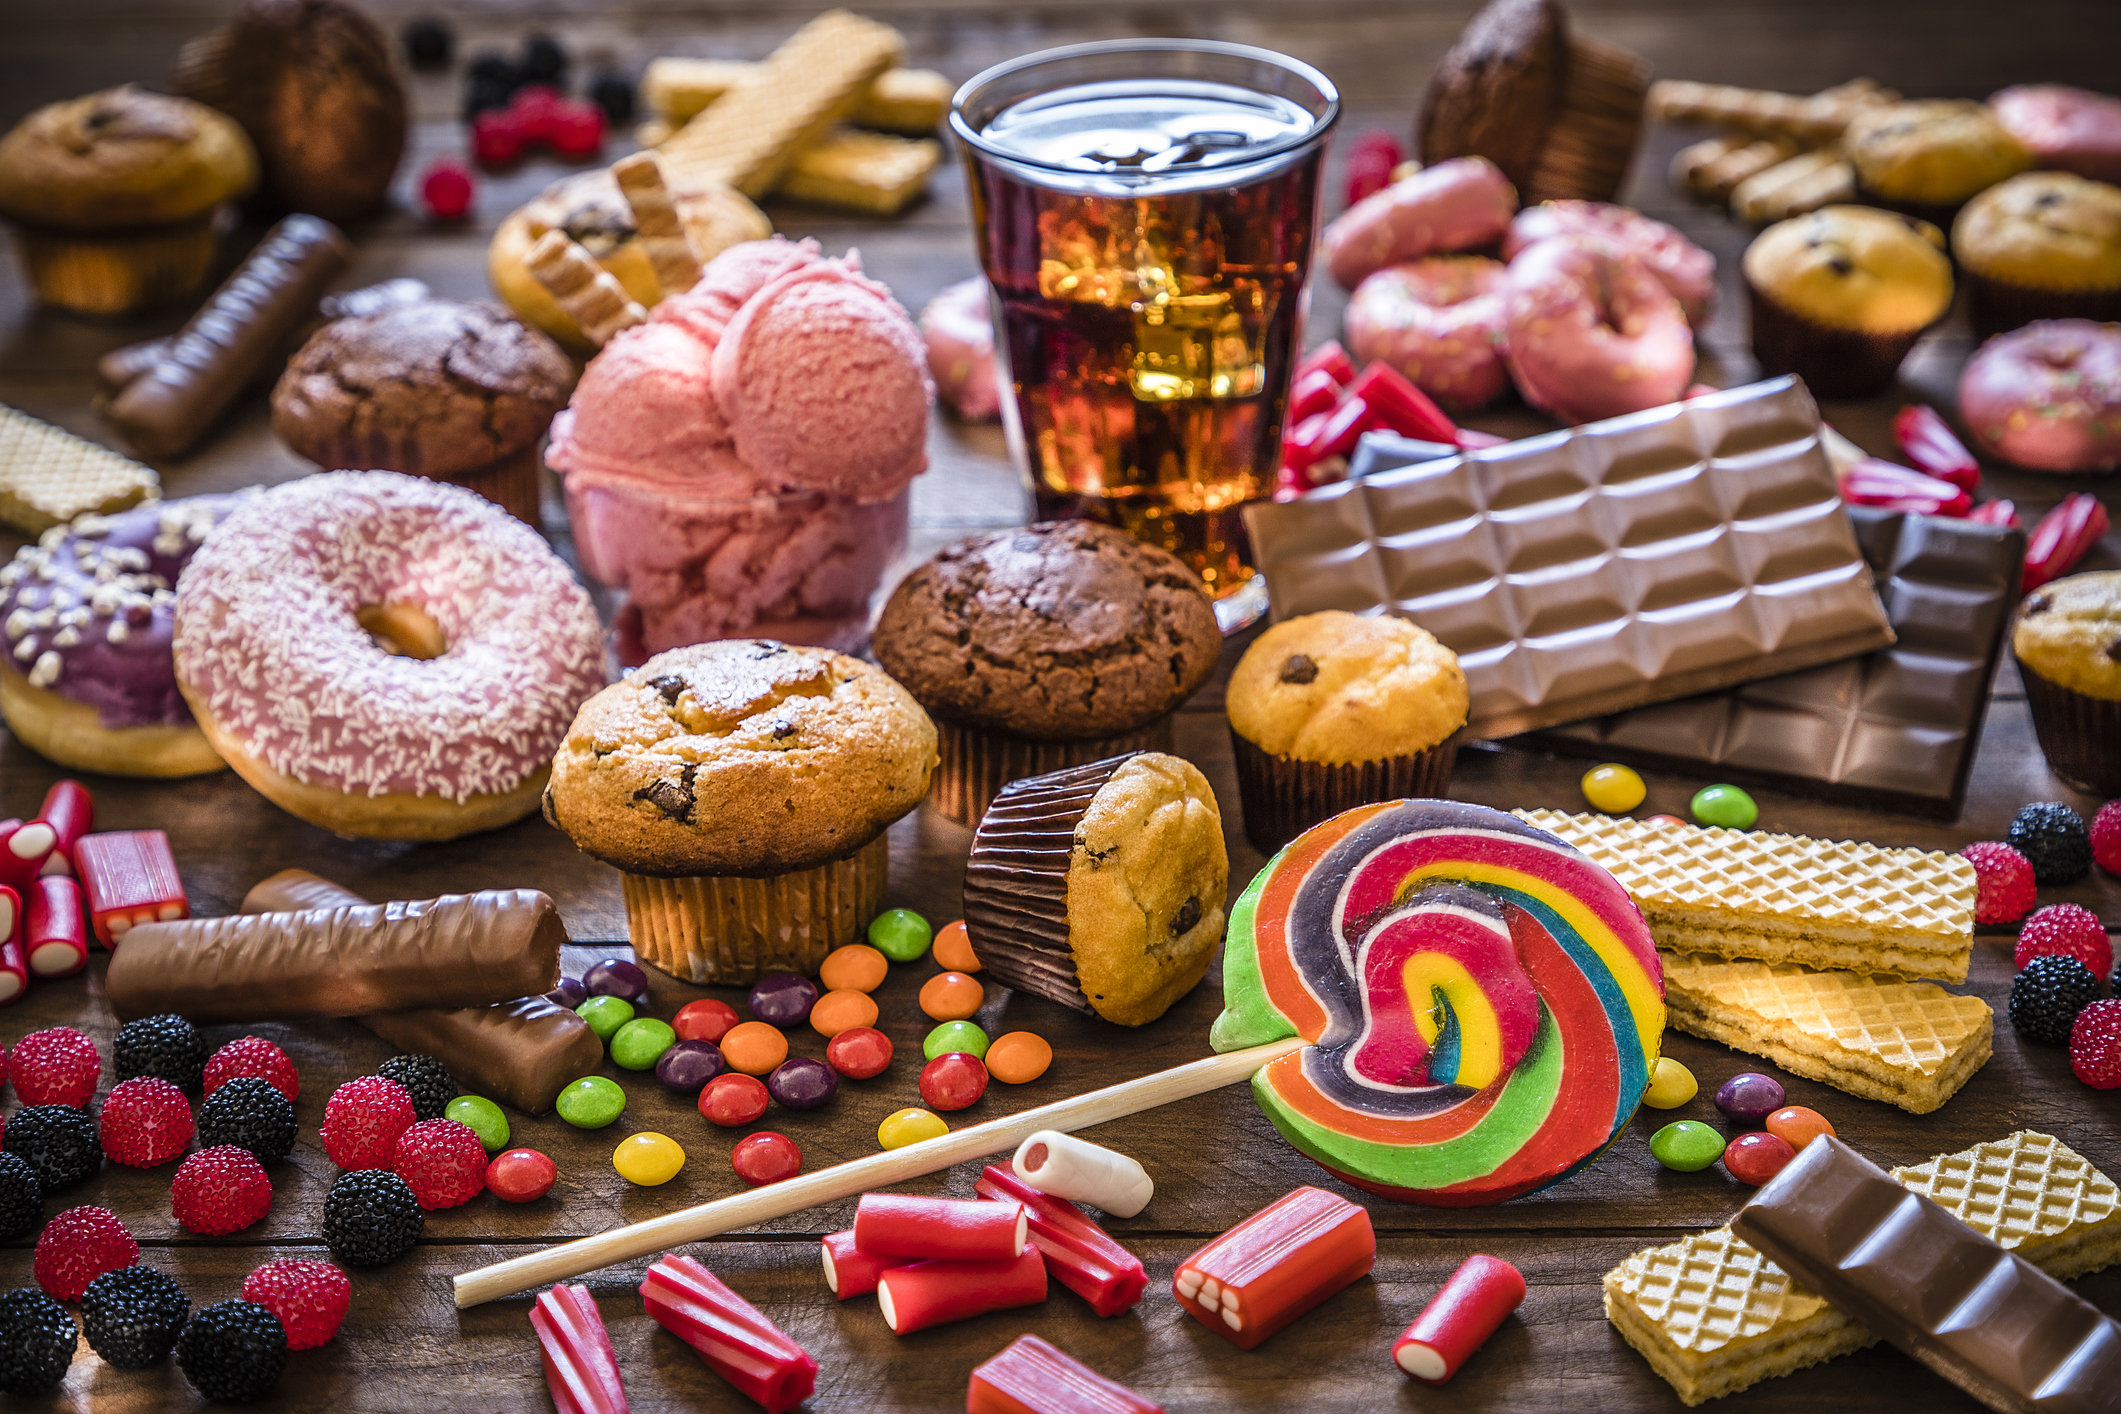 Image of Sugary Junk Food | Come off the Keto Diet